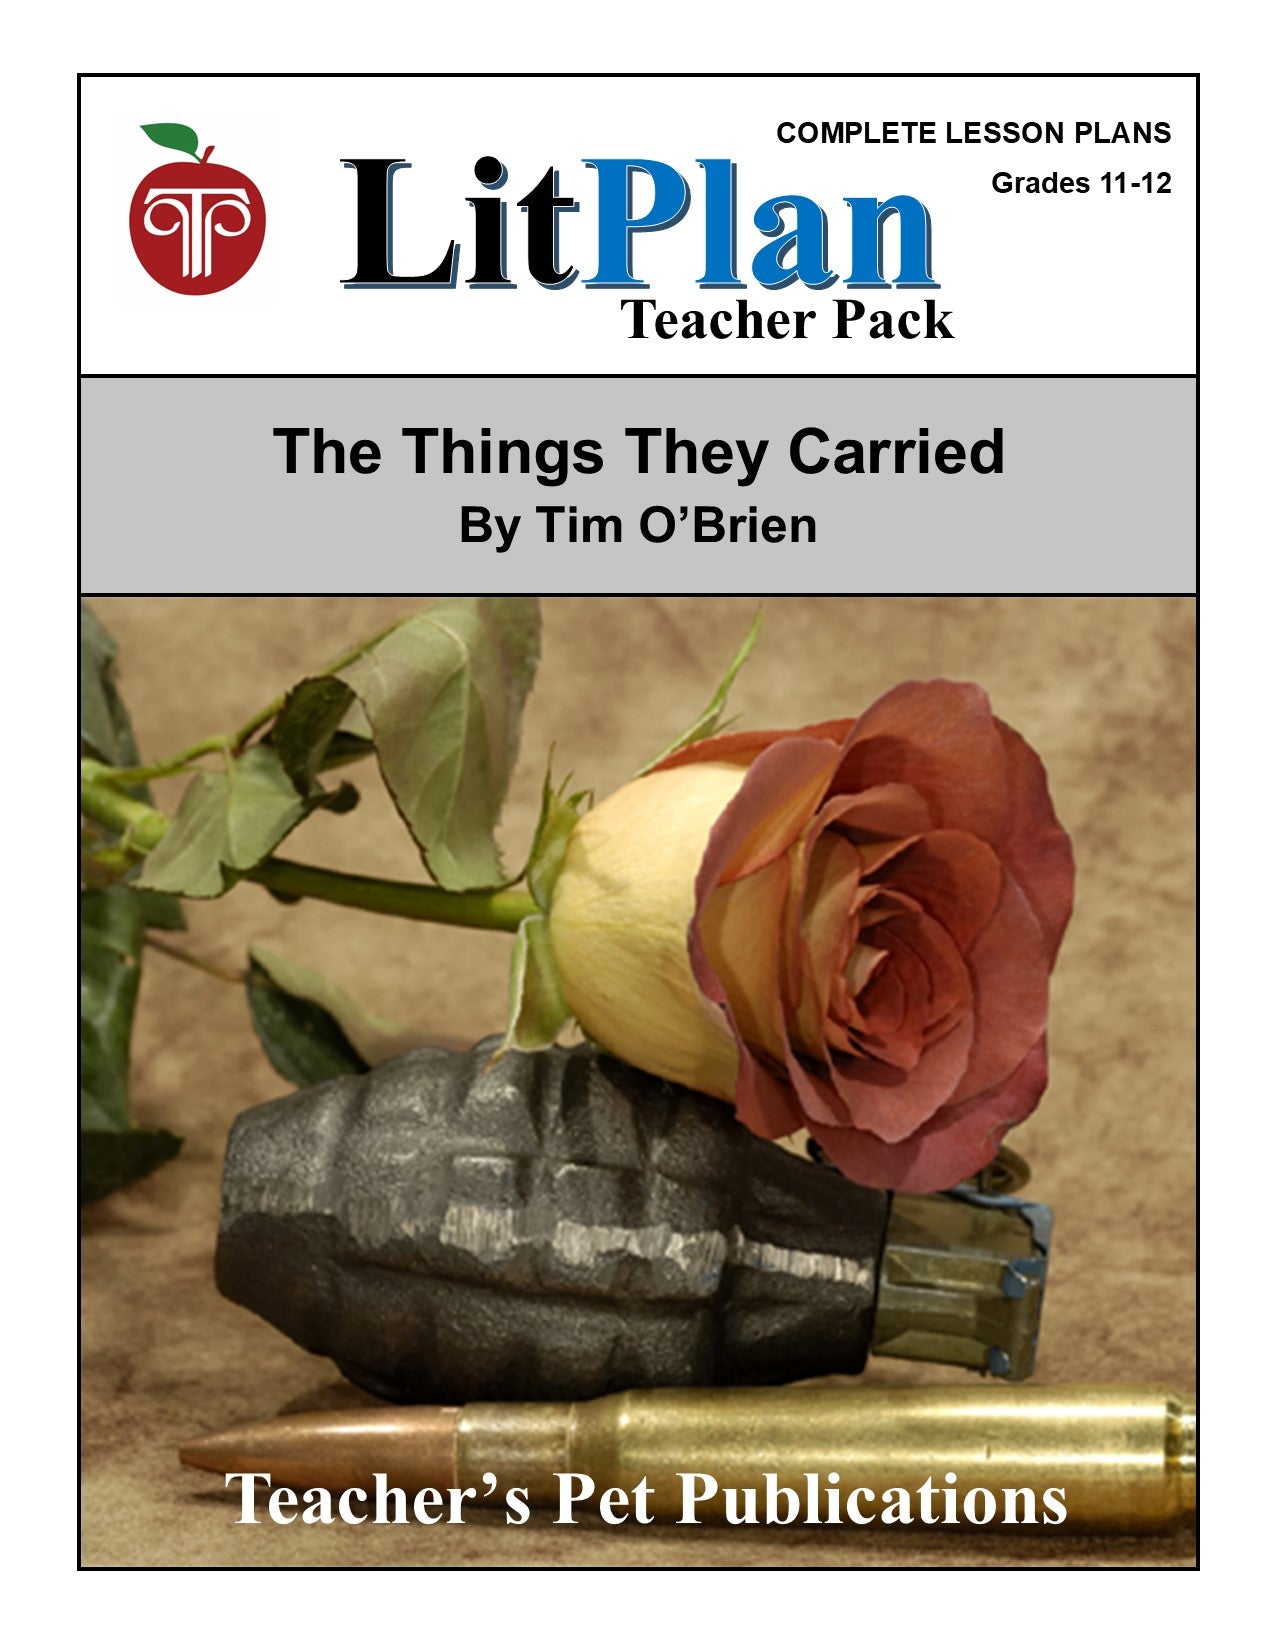 The Things They Carried: LitPlan Teacher Pack Grades 11-12